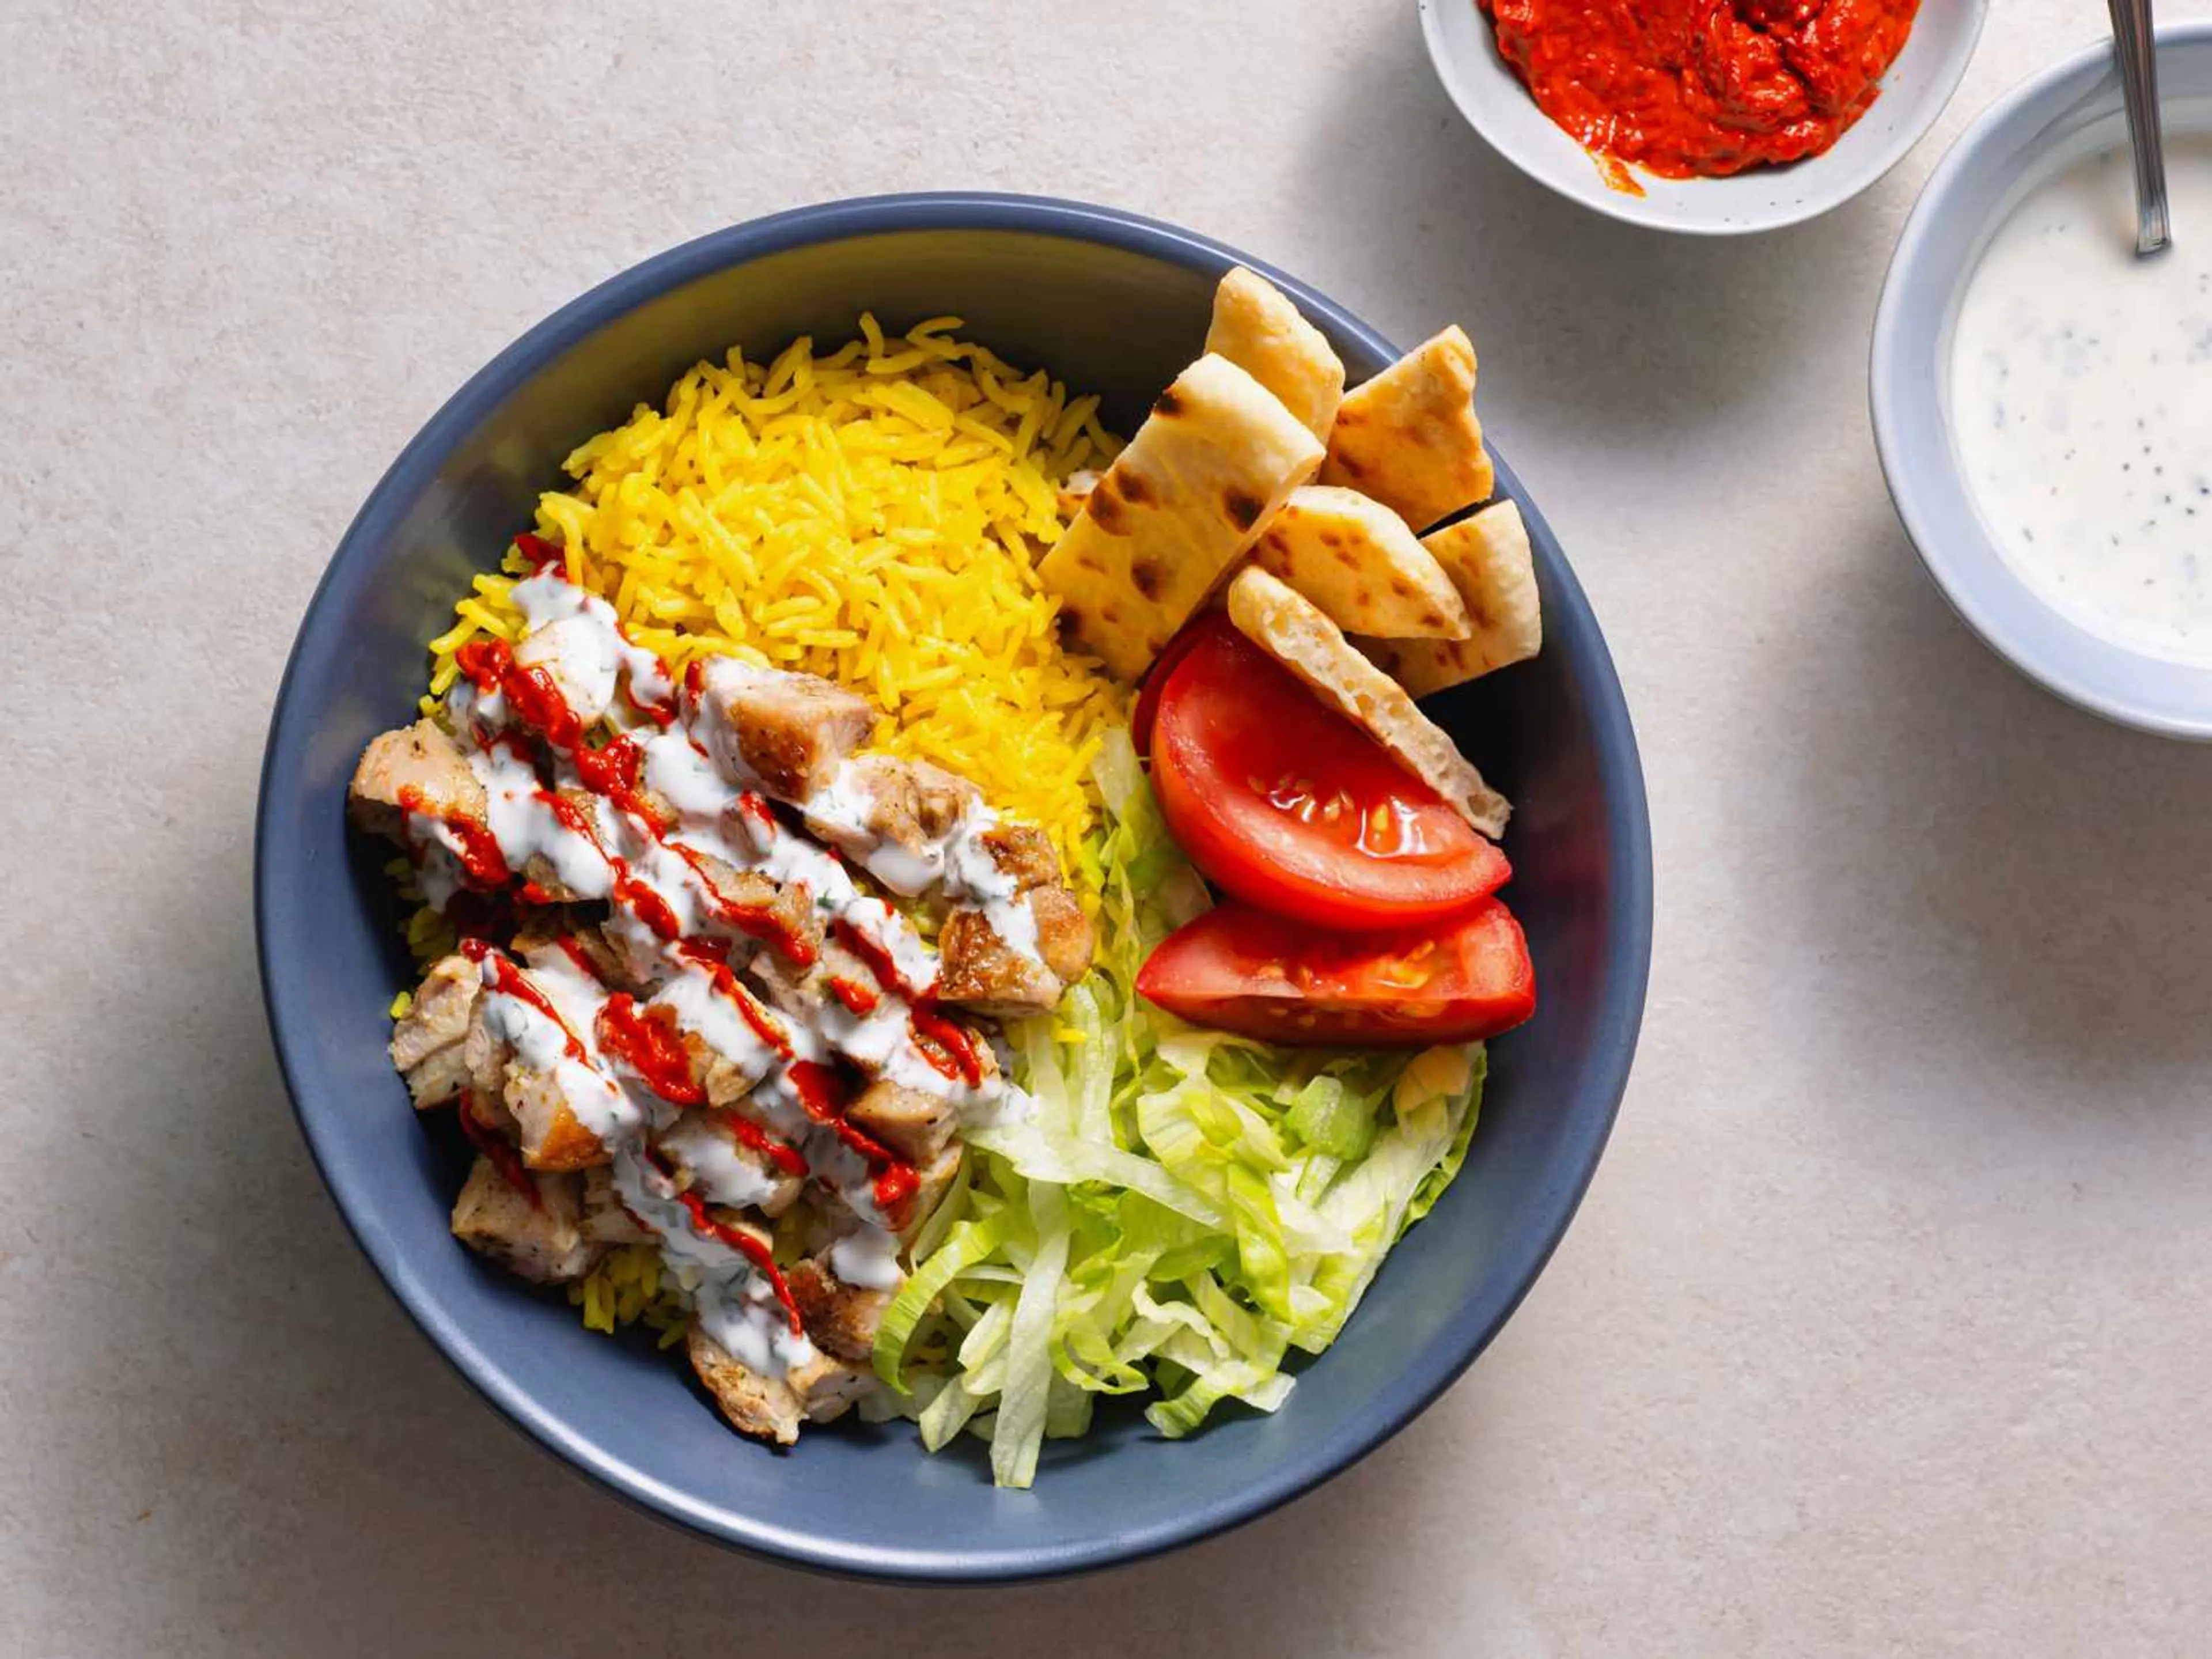 Halal Cart-Style Chicken and Rice With White Sauce